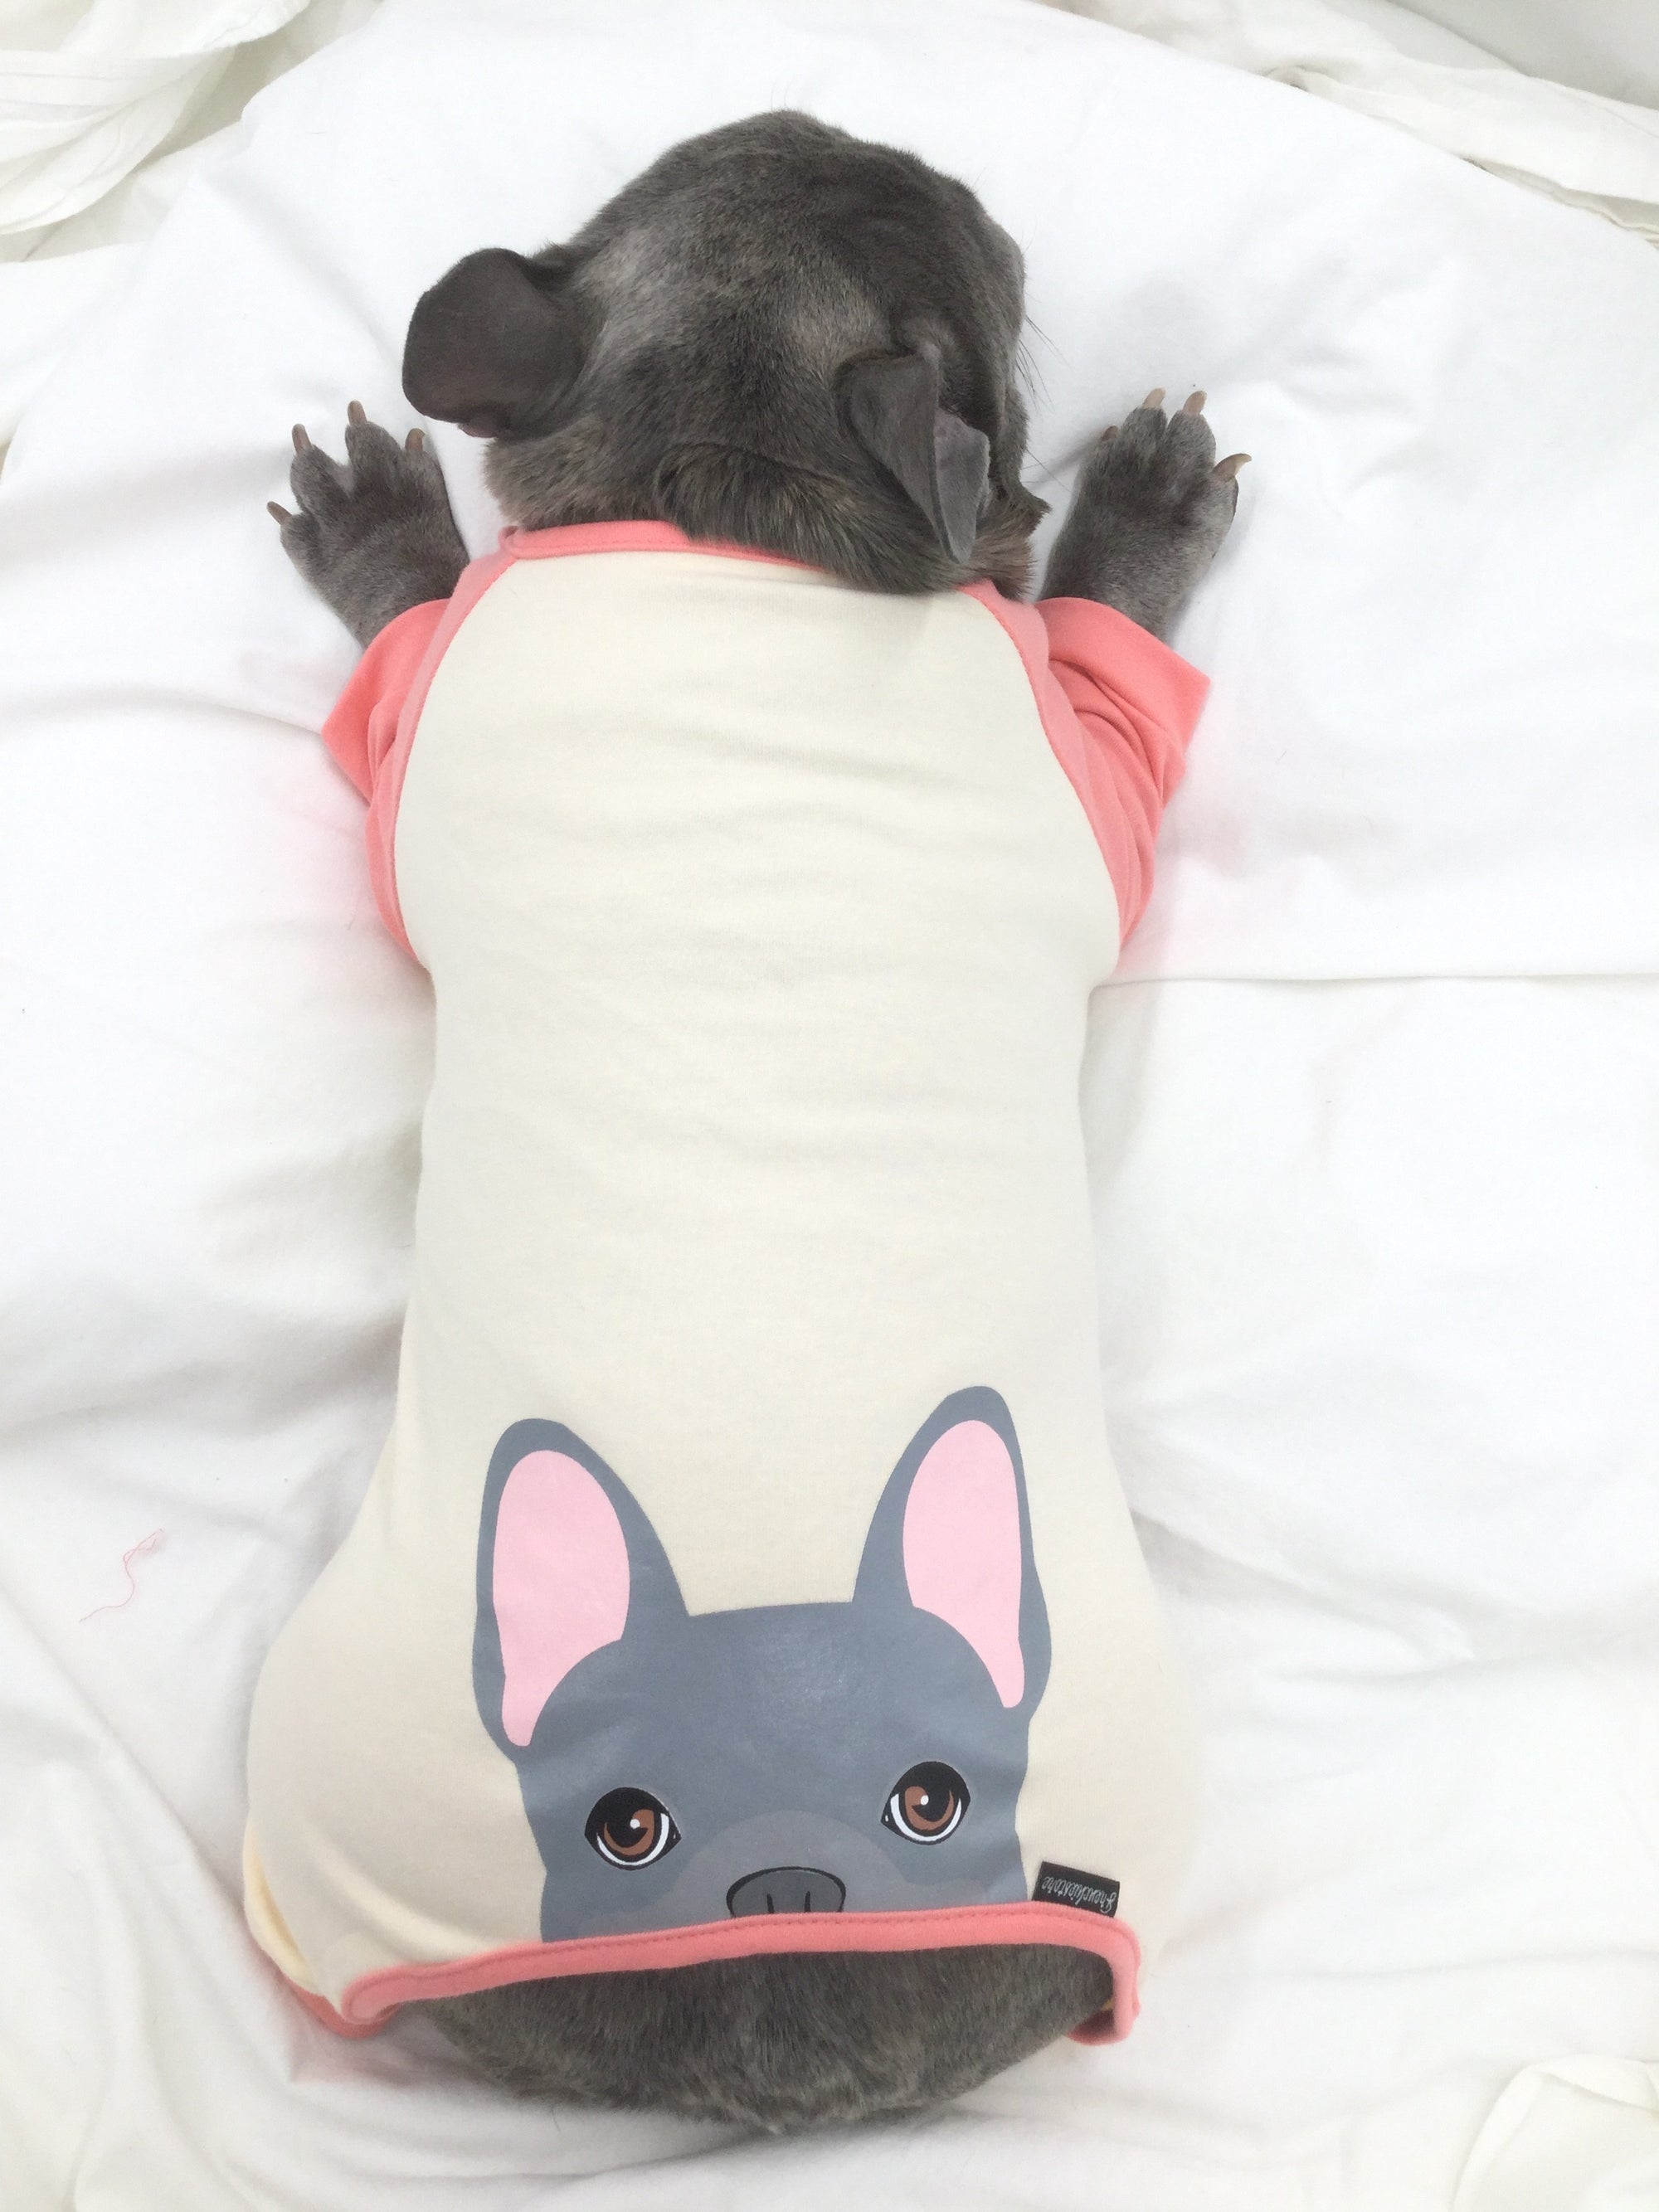 French Bulldog Pajamas in Coral | Frenchie Clothing | Blue Frenchie dog, Frenchie Dog, French Bulldog pet products